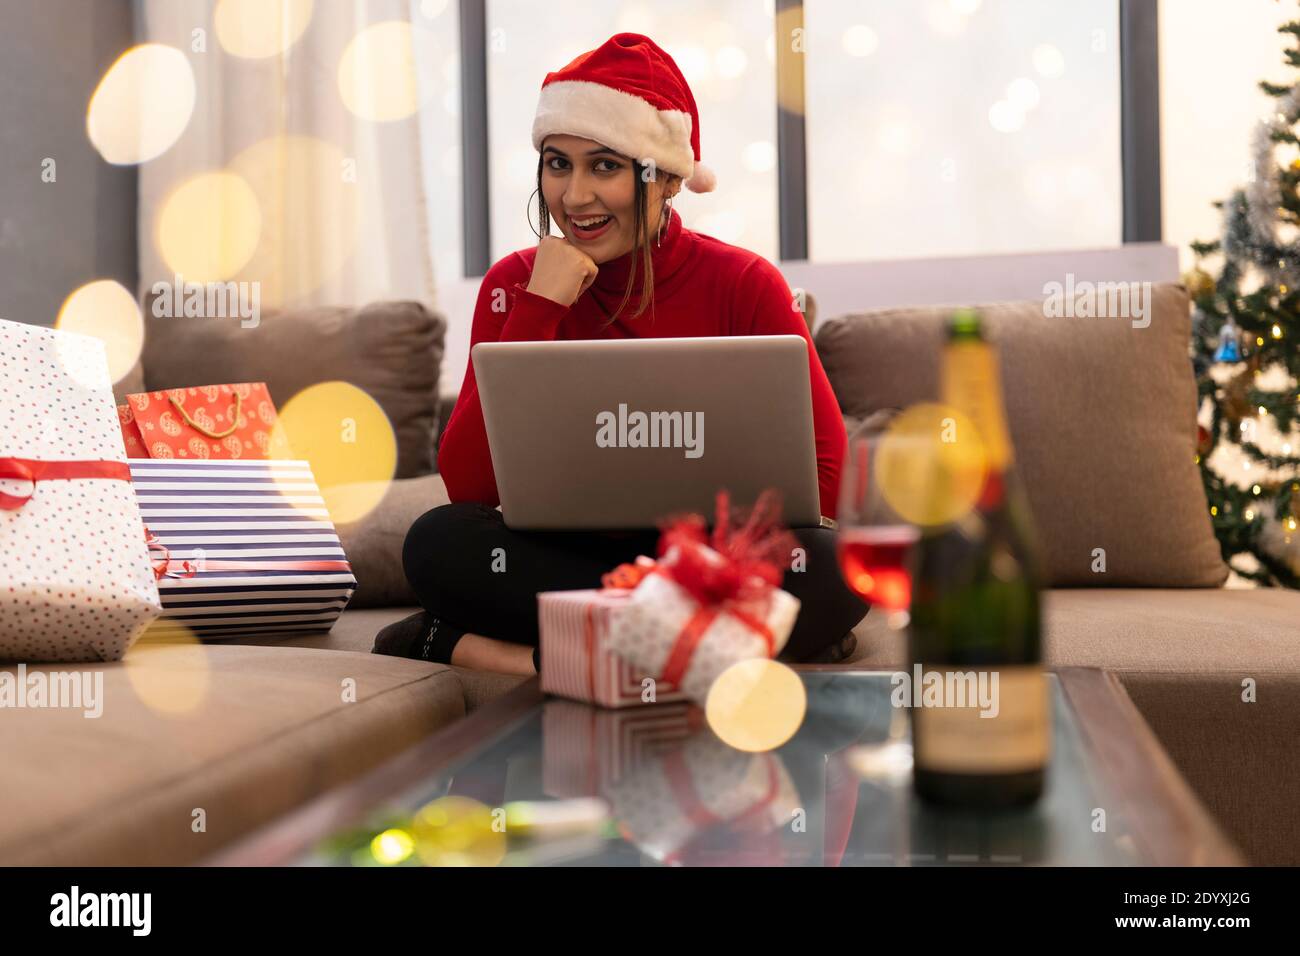 Happy Woman Making Video Call During Christmas Celebration Stock Photo